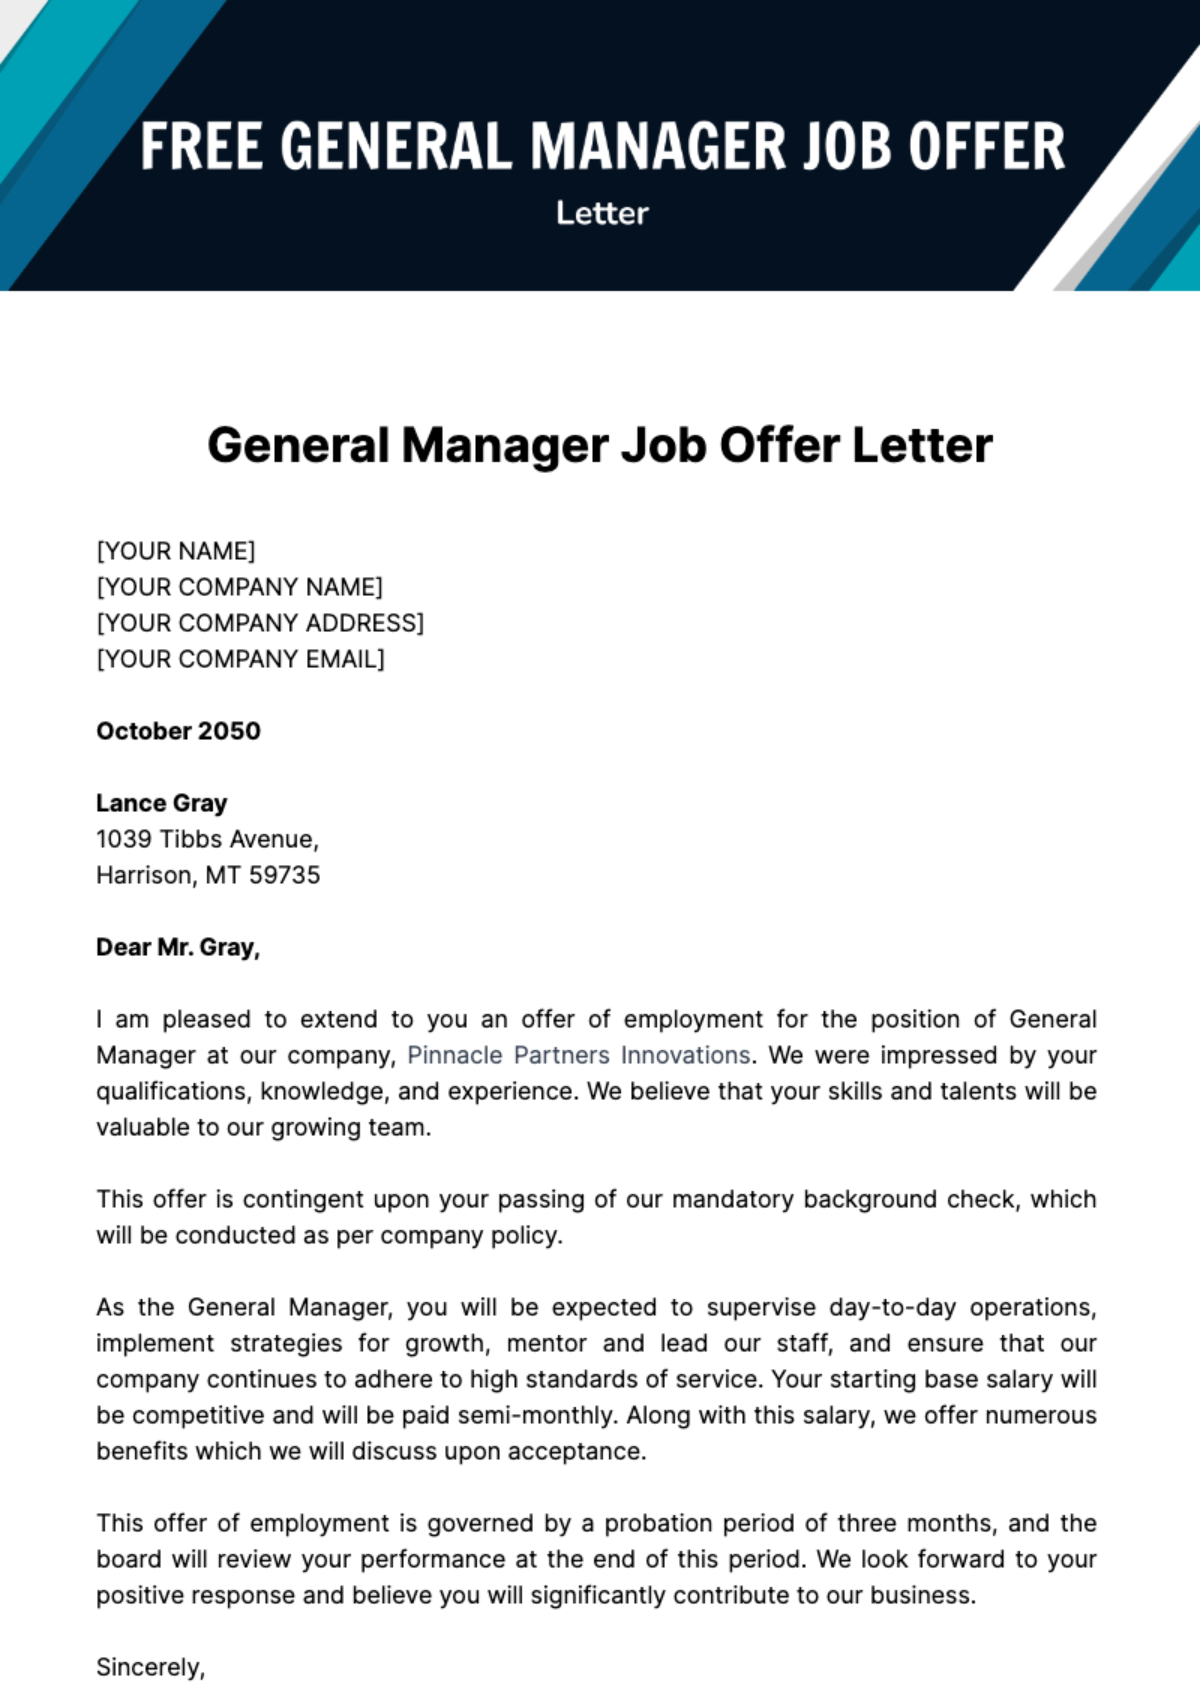 Free General Manager Job Offer Letter Template